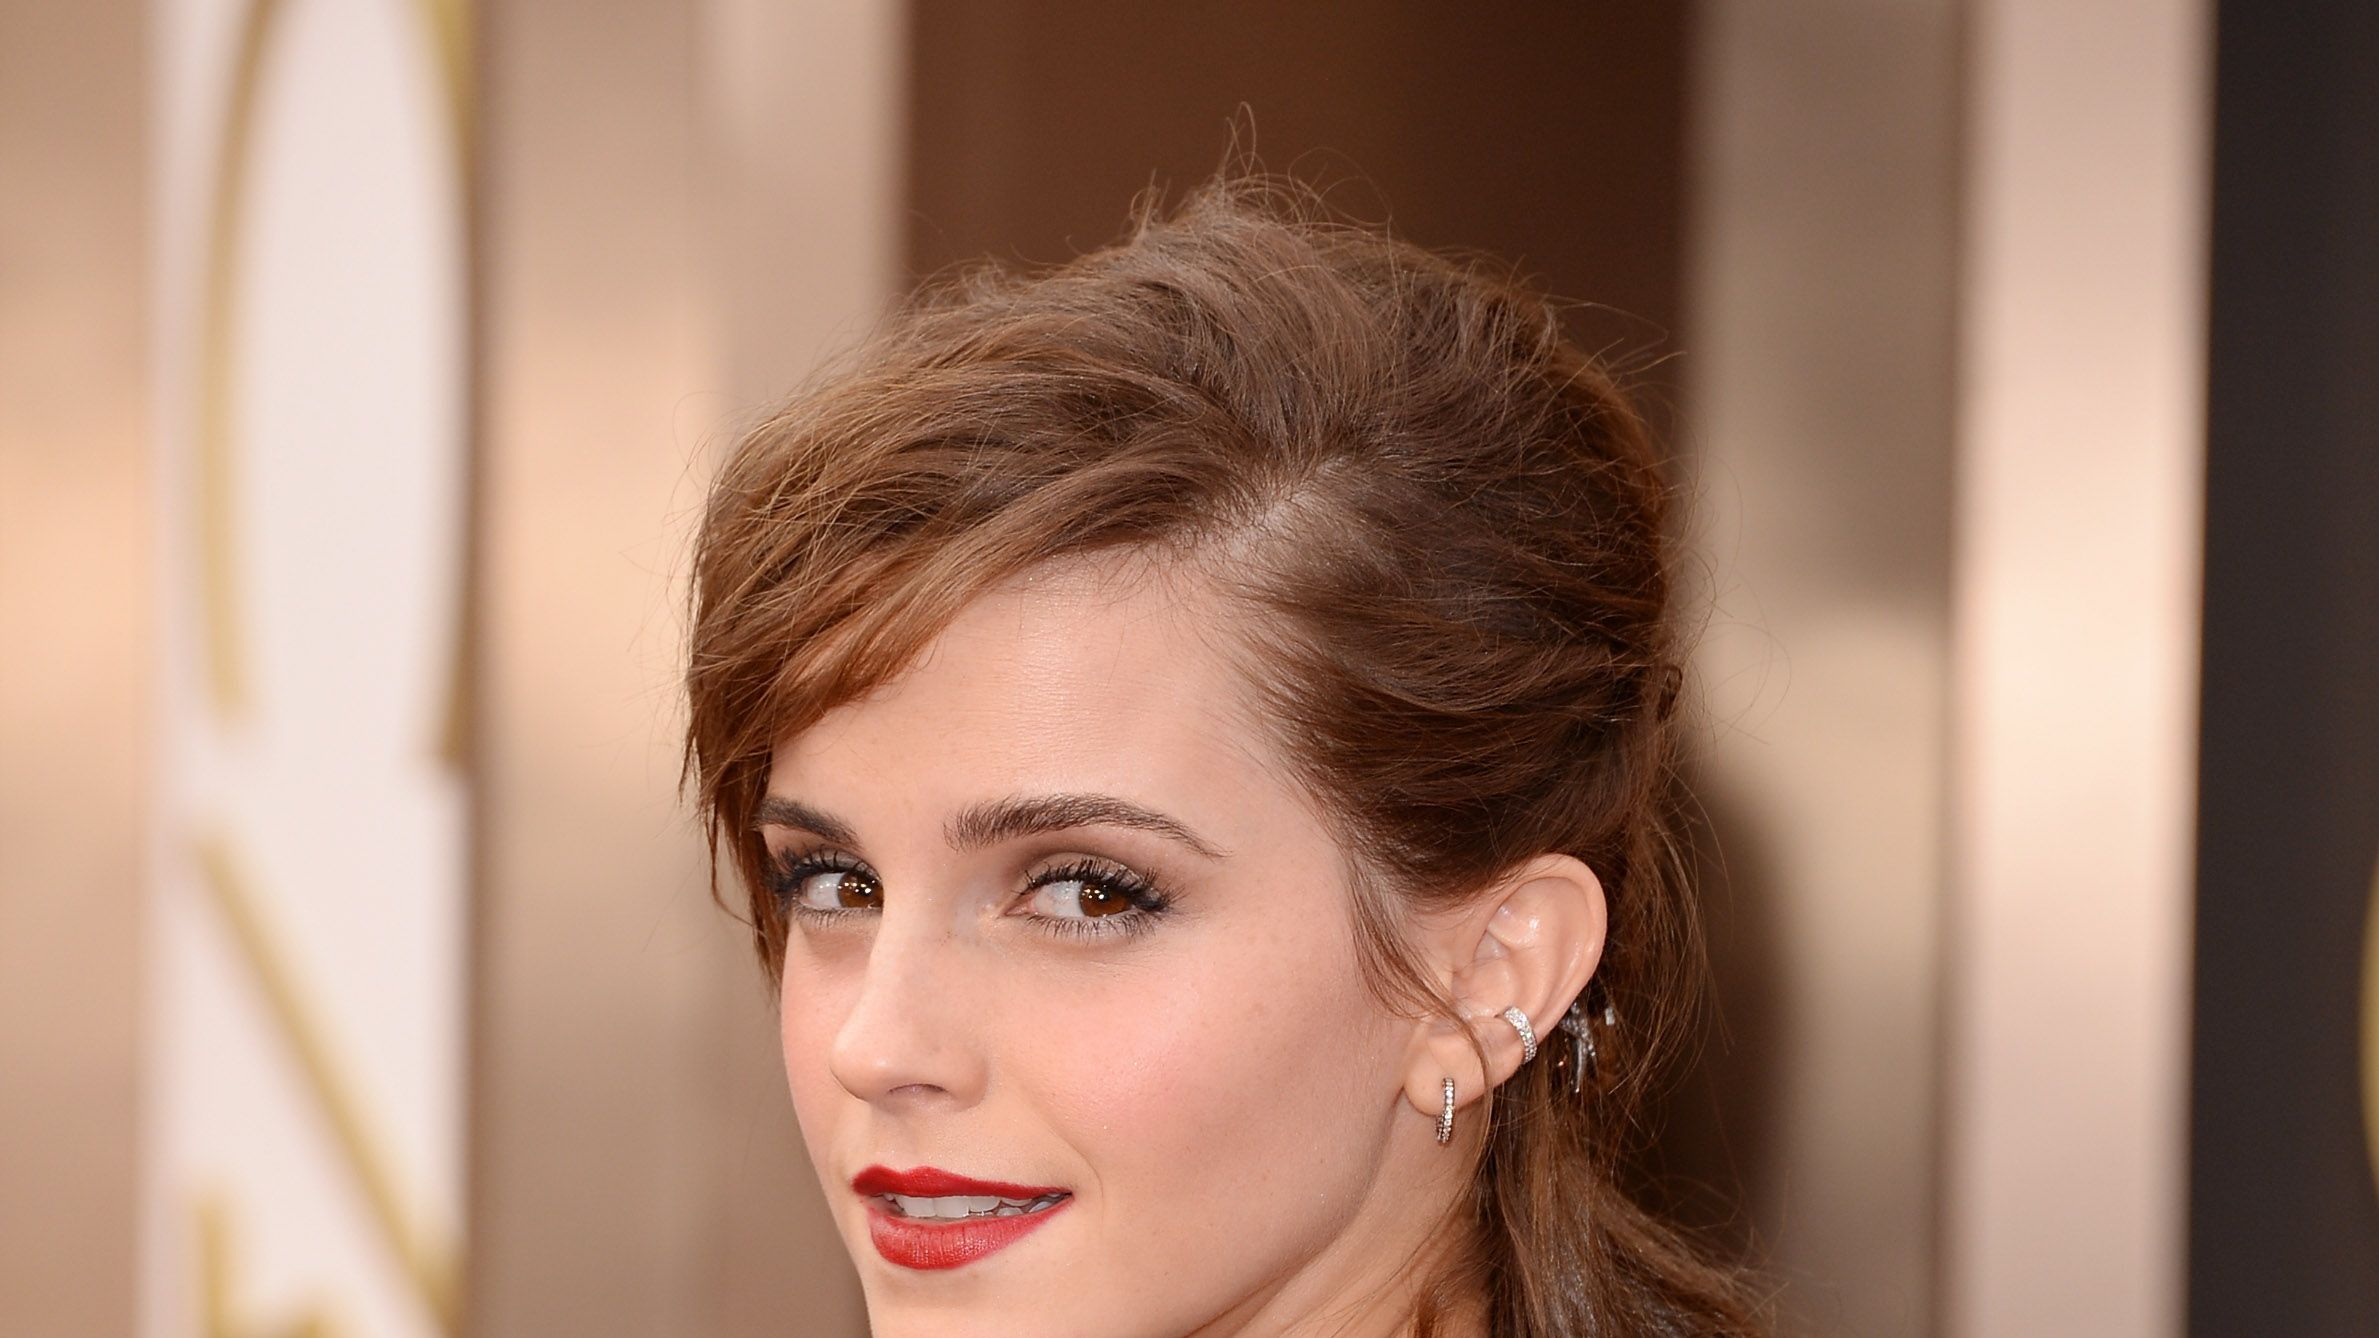 Emma Watson Serves Full Glam With Her Killer Abs In Prada IG Pics